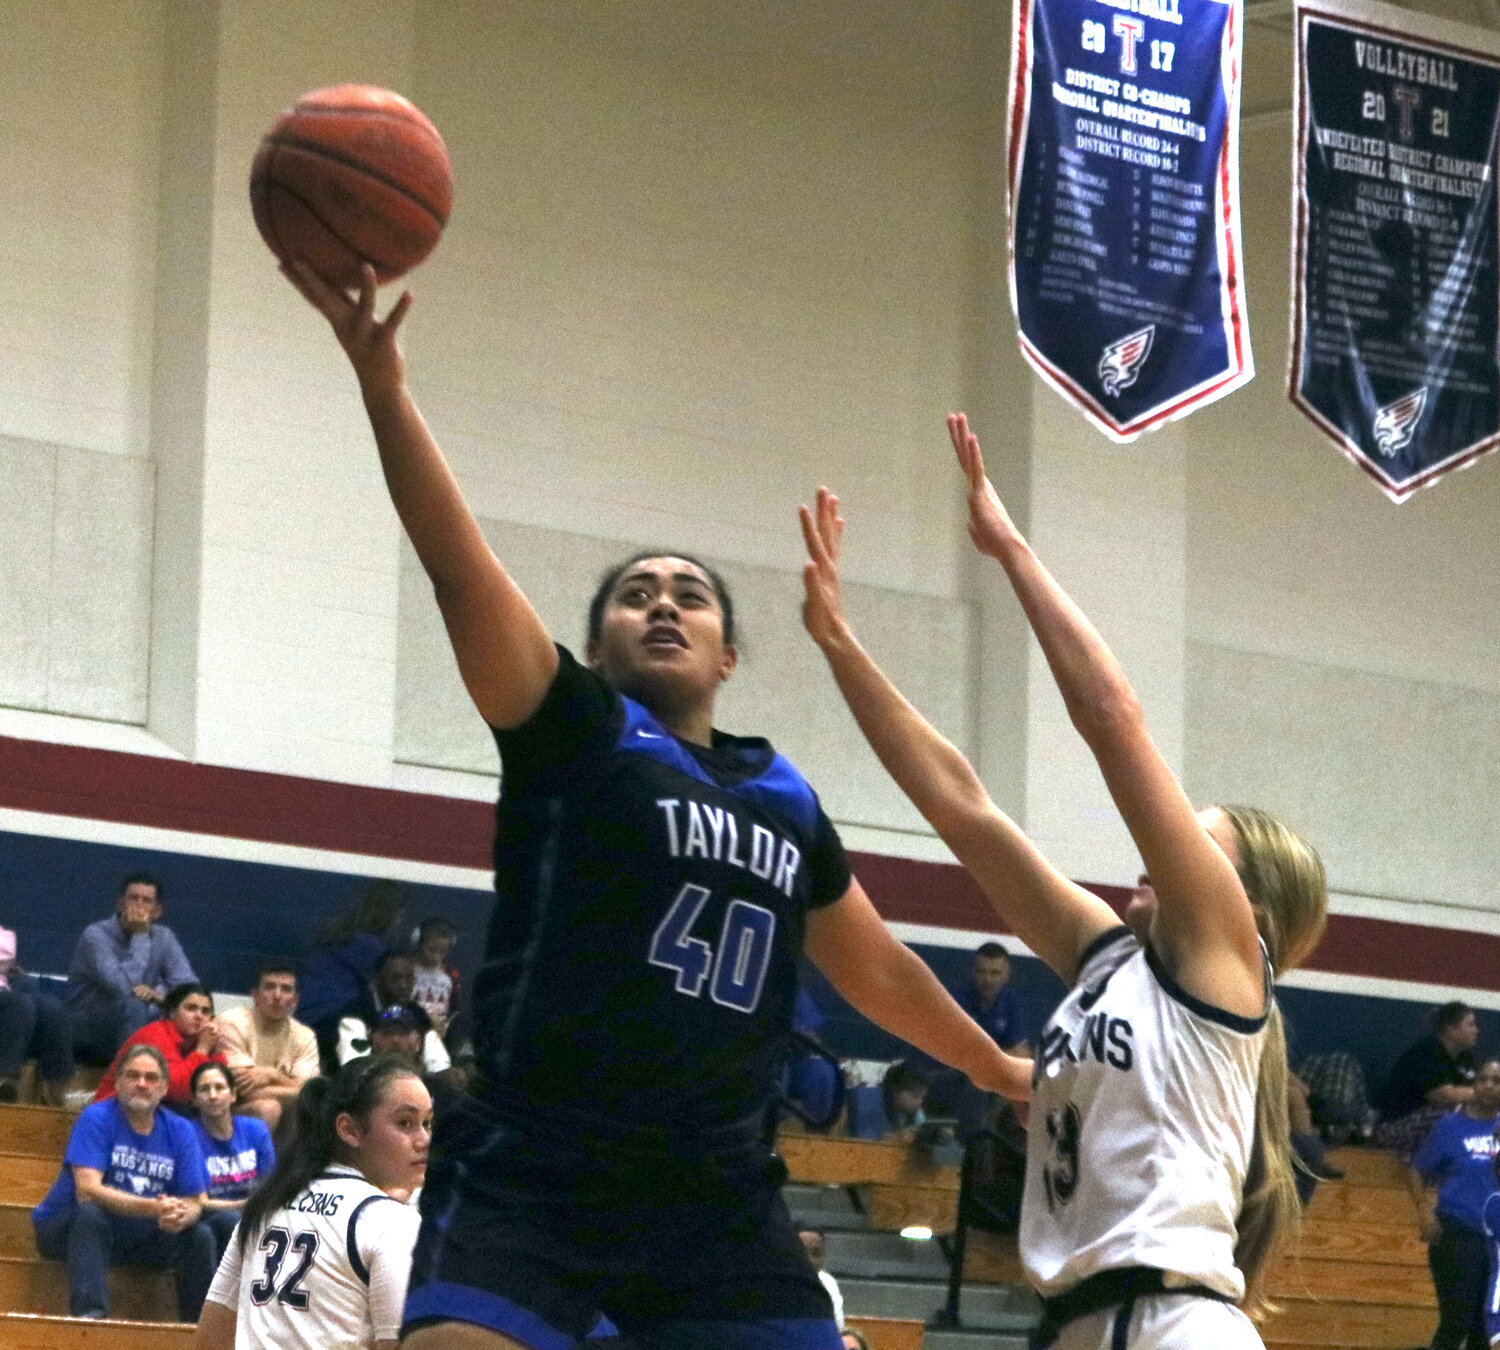 Fiapaipaitufanuaitamalii Filoialii goes up for a layup during Friday's game between Taylor and Tompkins at the Tompkins gym.